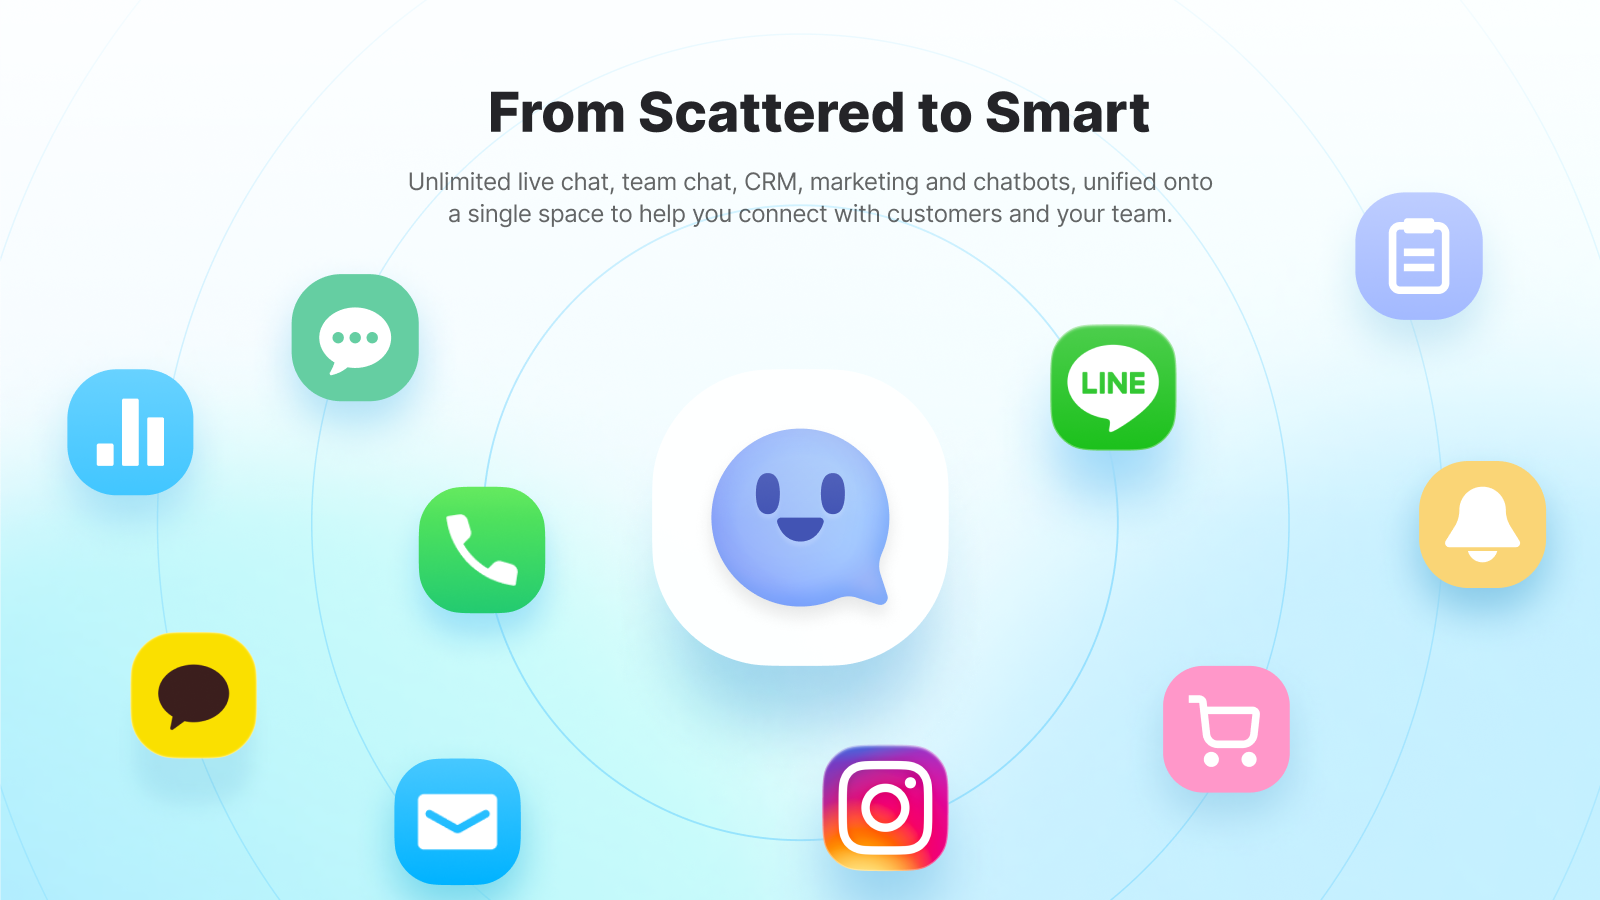 From Scattered to Smart - Unlimited live chat, team chat, CRM, marketing and chatbots, unified onto a single space to help you connect with customers and your team.